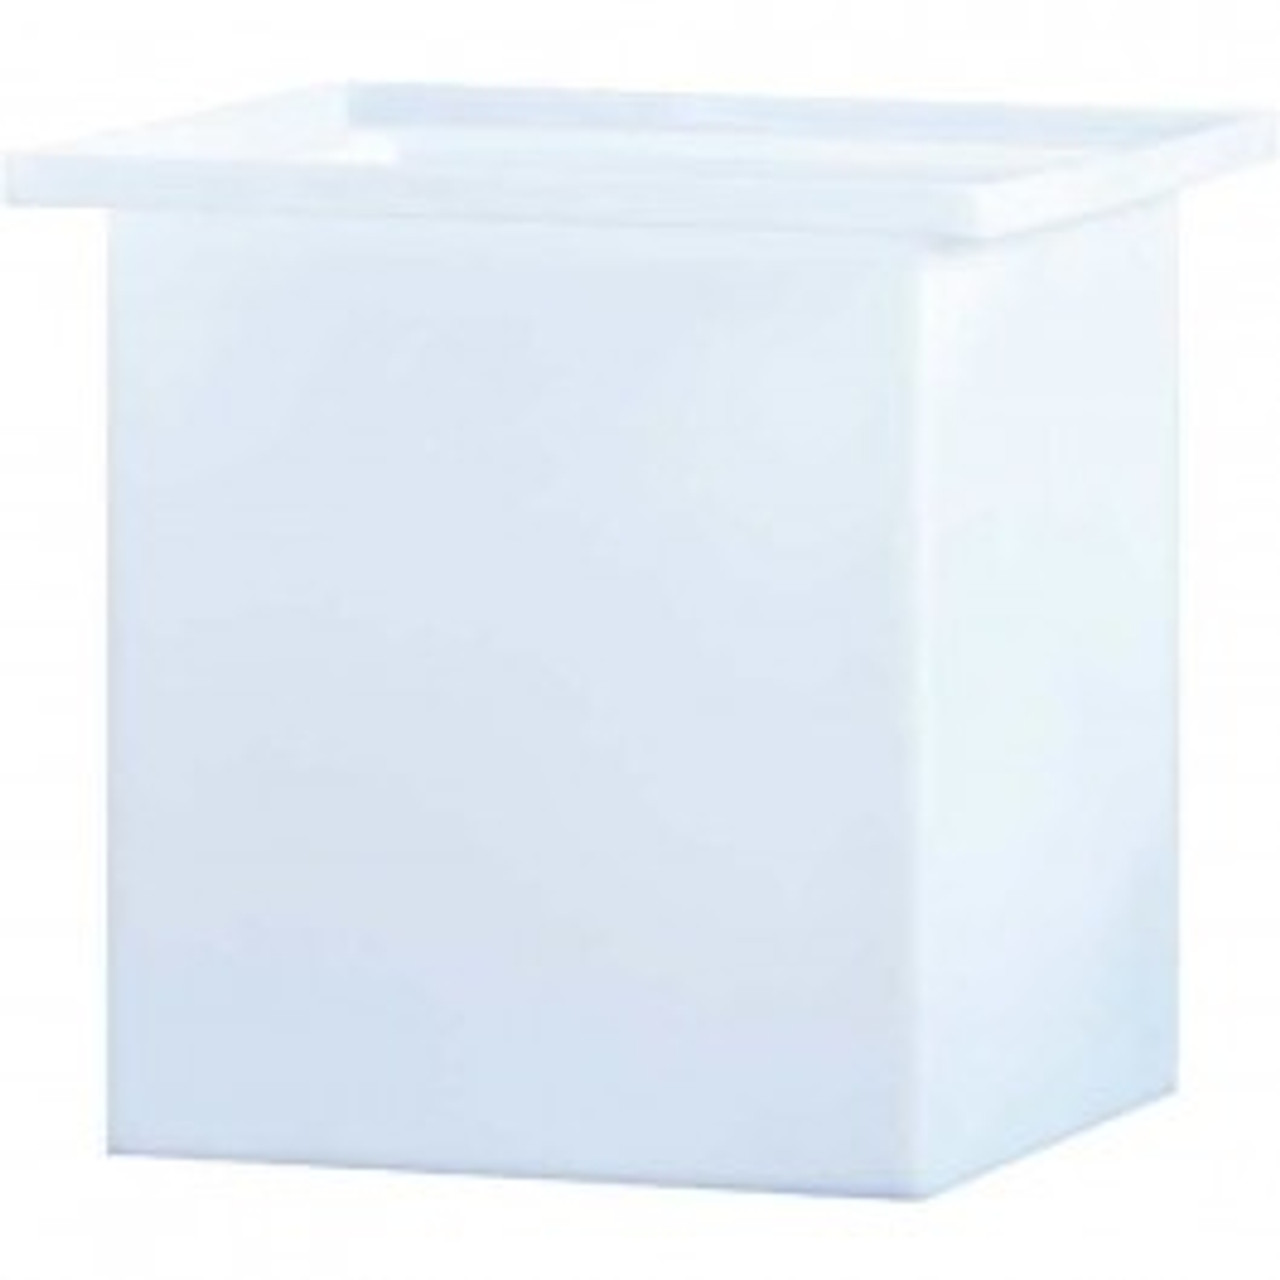 An image of a 36 Gallon PE Chem-Tainer White Rectangular Open Top Tank | R123024A